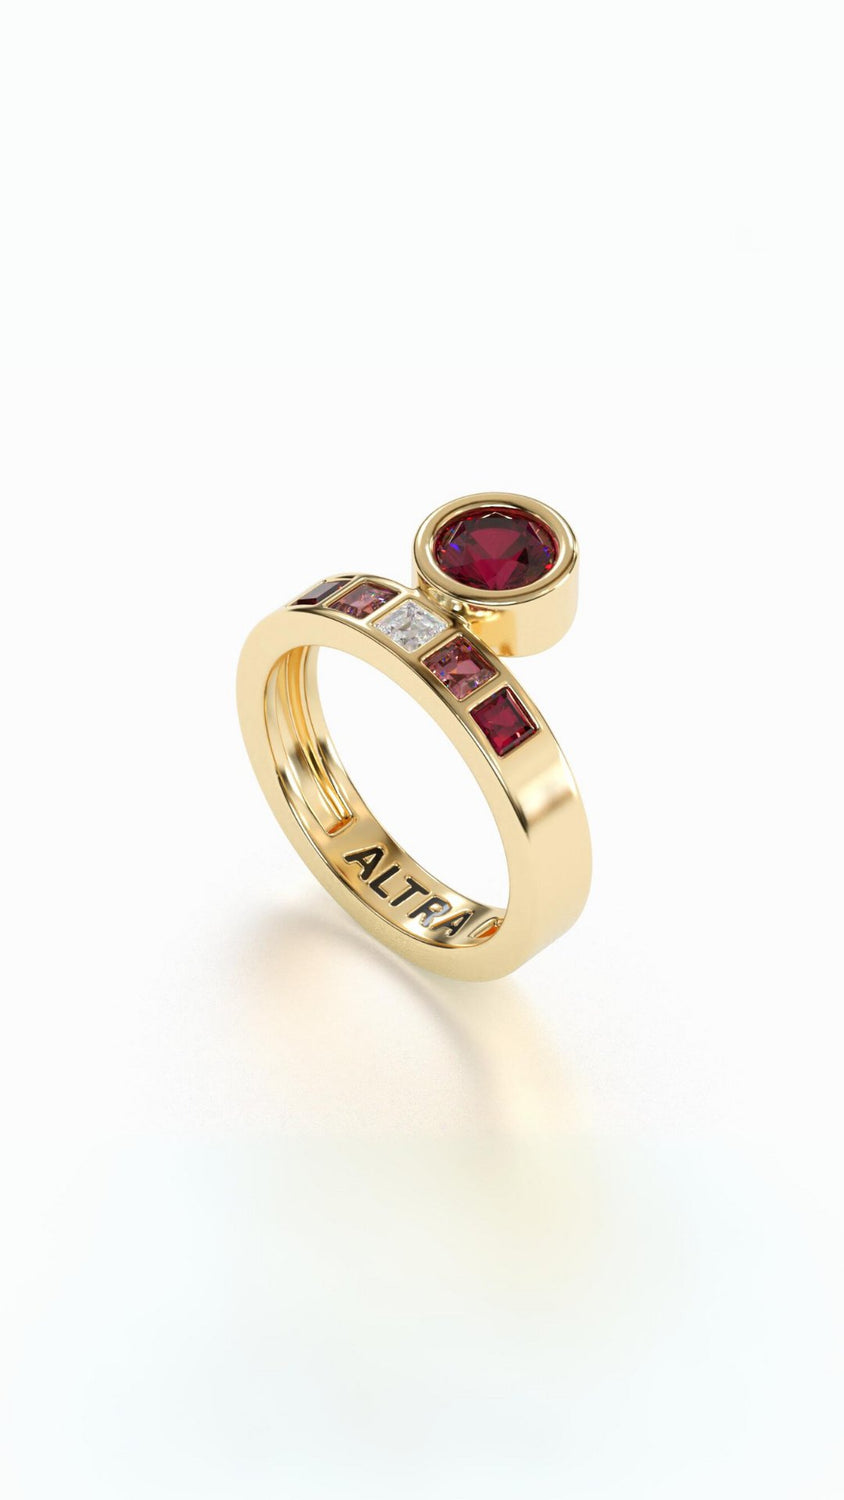 Ruby | 9k Gold Ring - ALTRA Jewellery -